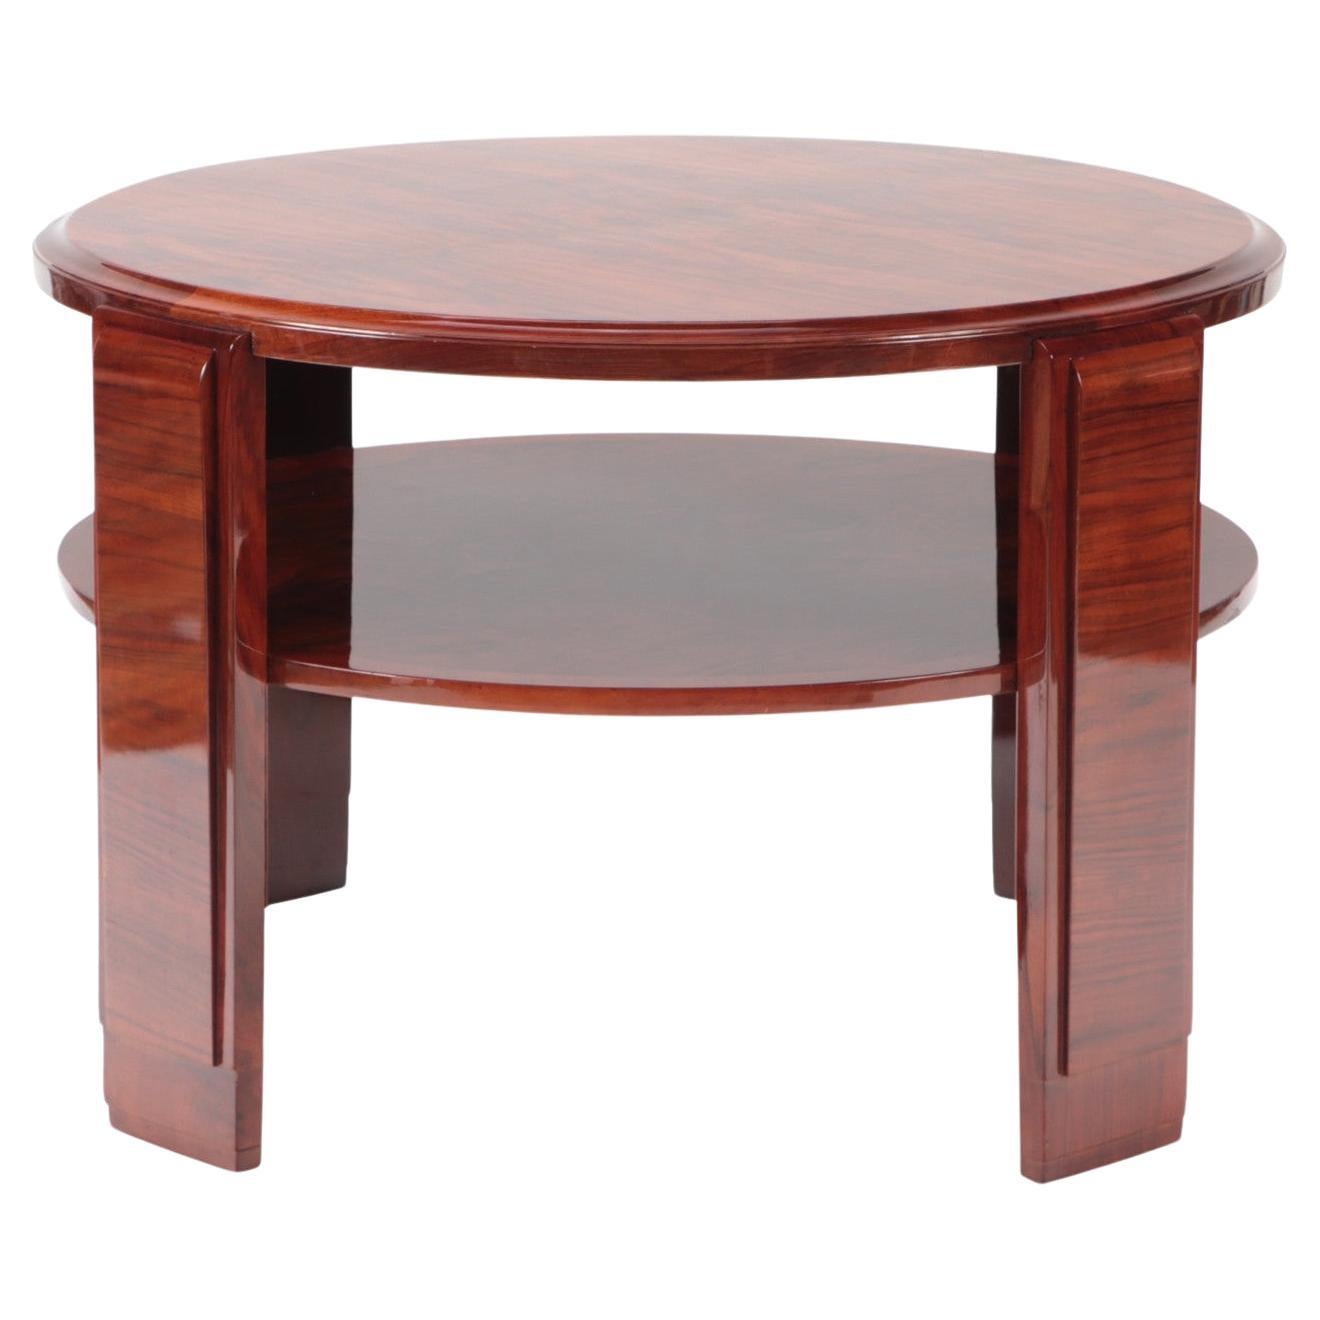 Large Round Art Deco Occasional Table, C 1940 